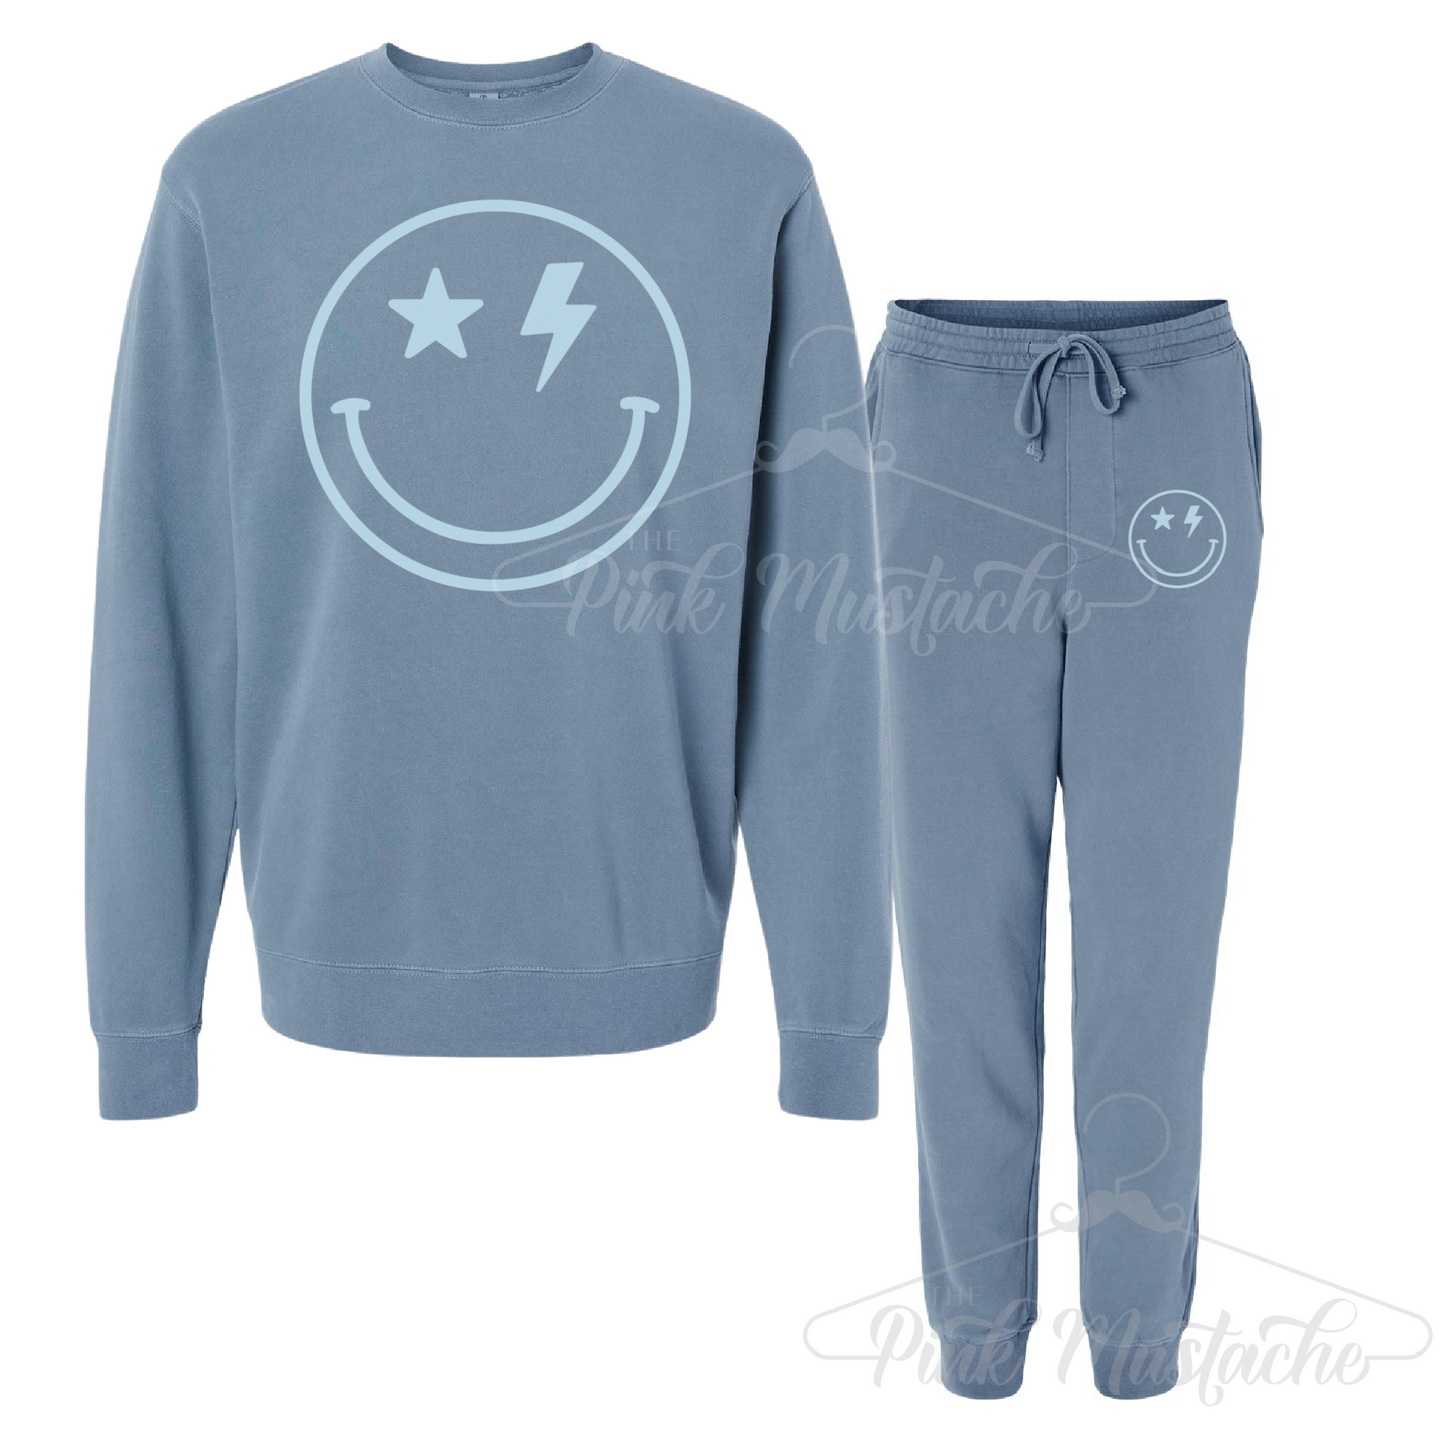 Smiley Face Rocker Joggers/ Pigment Dyed Sweatshirt/ Set - Sold Separately